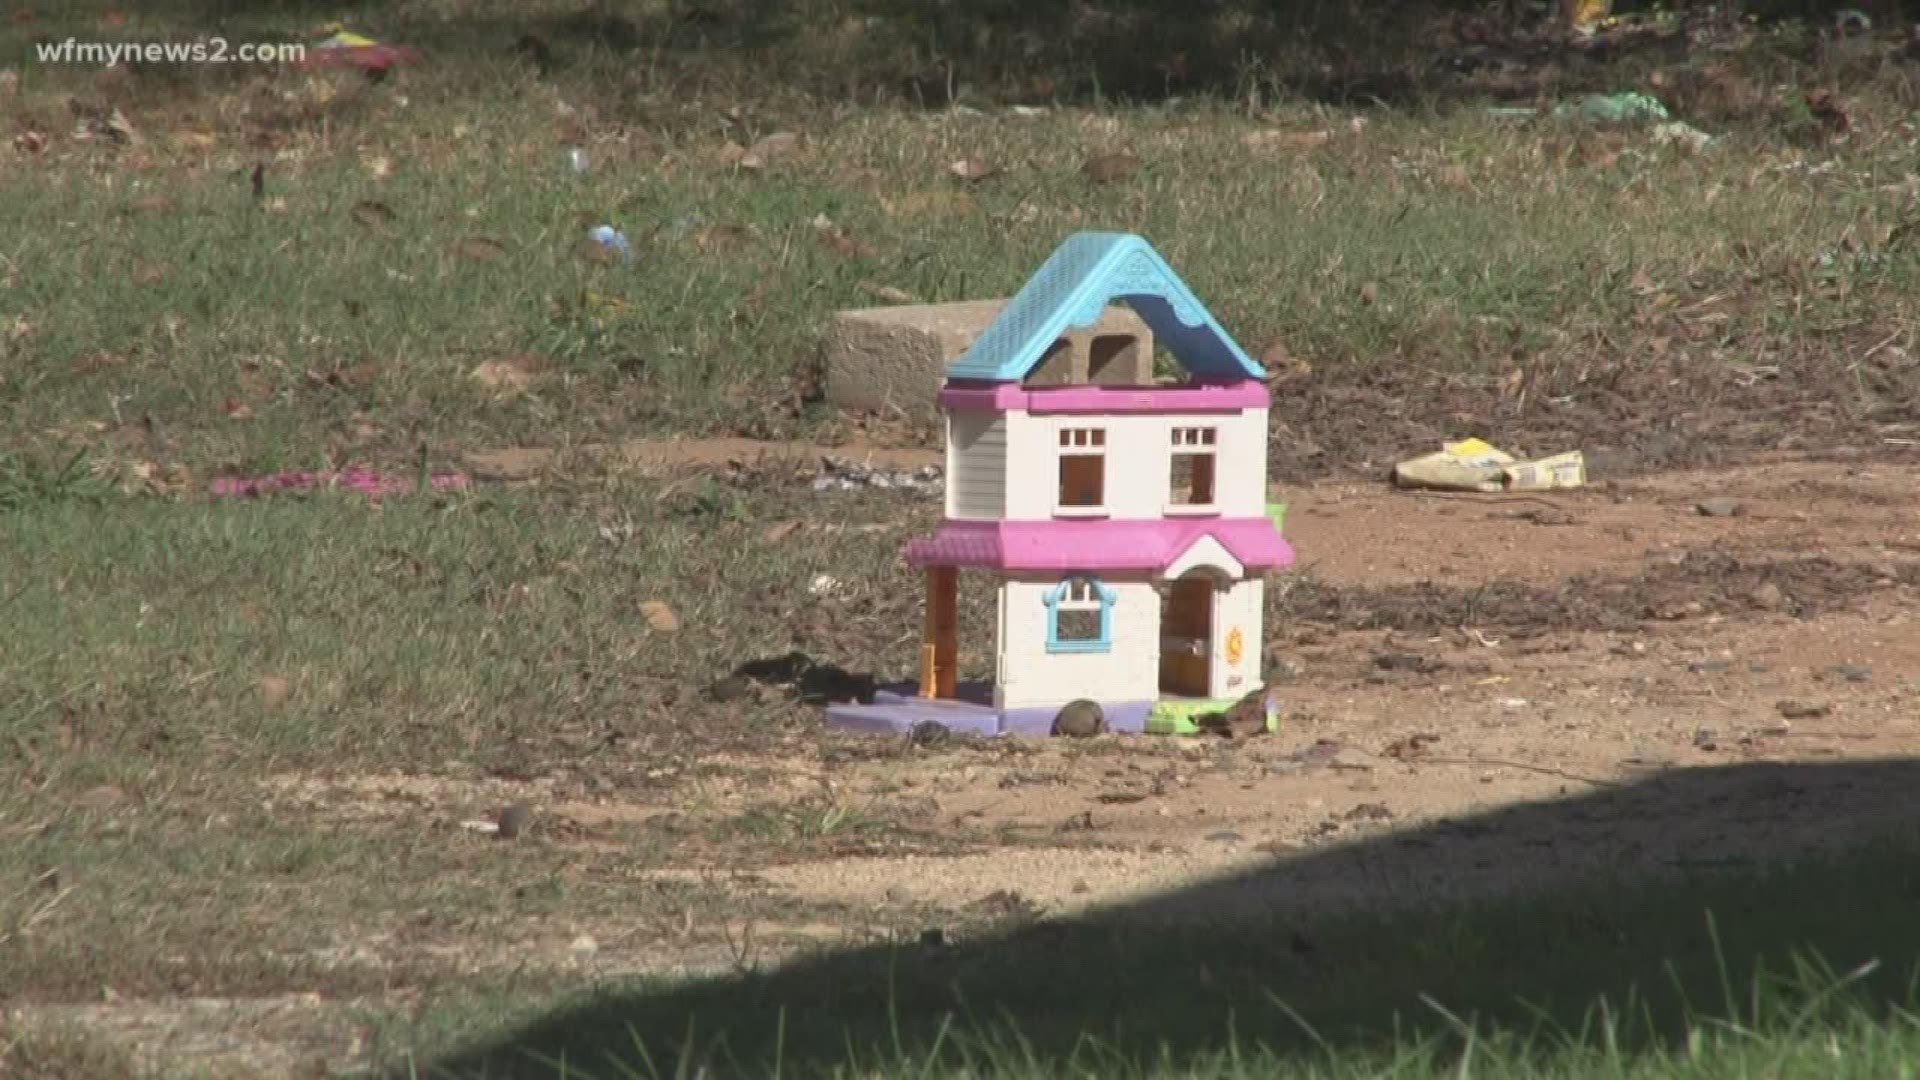 Seven Kids Removed from "Very Filthy" Home